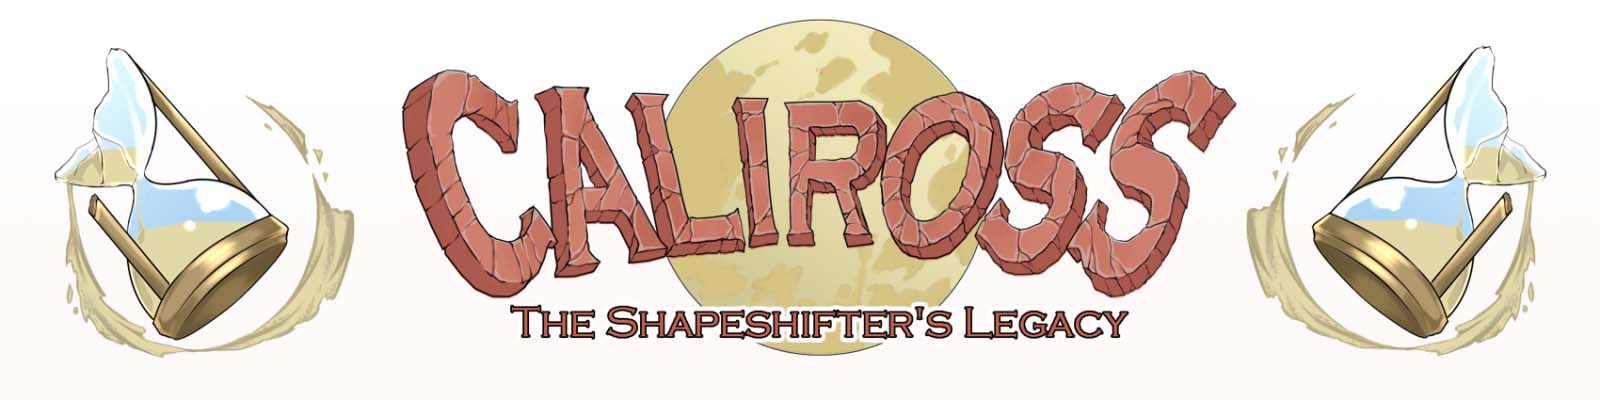 Caliross, The Shapeshifter's Legacy - 3D Adult Game